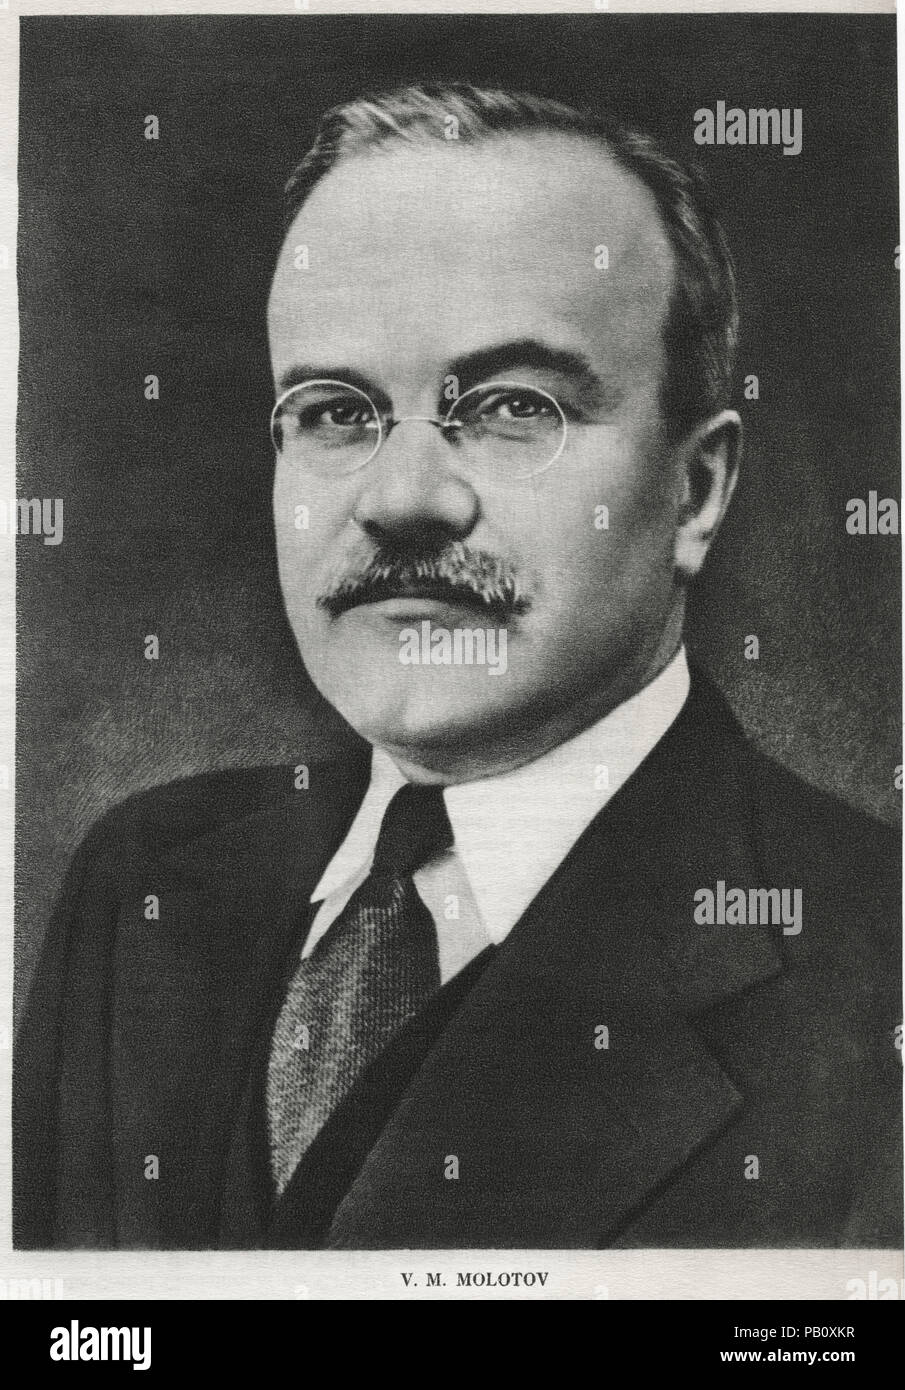 Vyacheslav Mikhailovich Molotov (1890-1986), Politician, Diplomat, and Leading Figure in Soviet Government from the 1920's to 1940's, Portrait Stock Photo